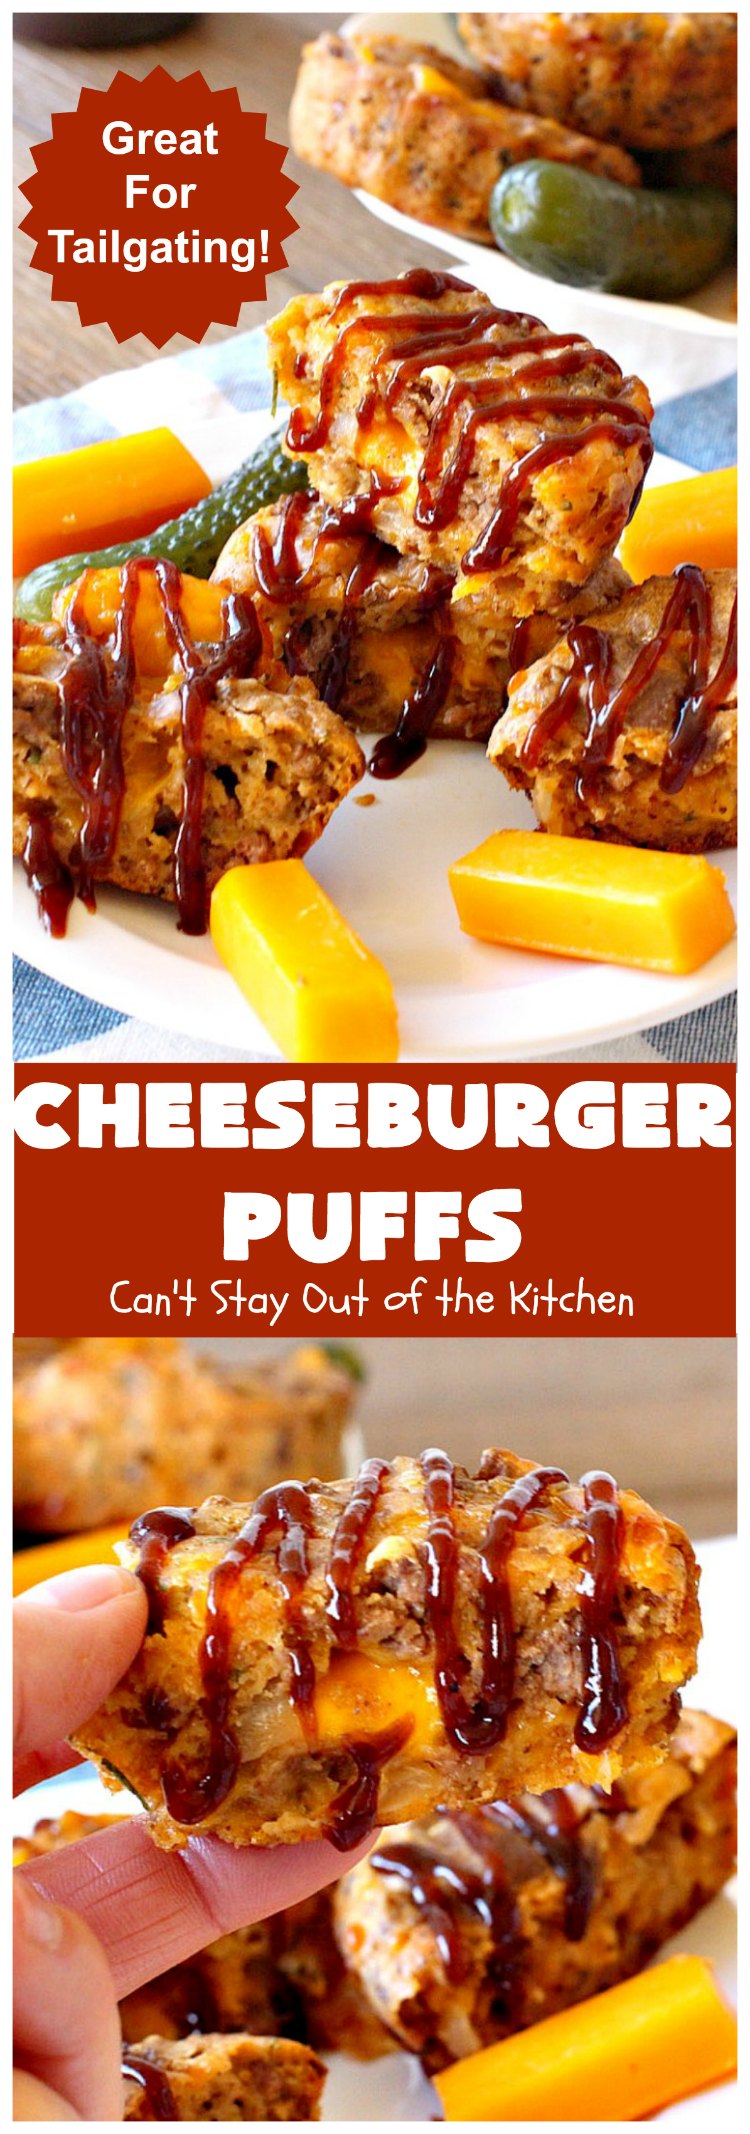 Cheeseburger Puffs | Can't Stay Out of the Kitchen | these fantastic #appetizers are perfect for #tailgating parties, potlucks or special occasions like birthdays or baby showers. Just drizzle with #BBQSauce & you have a delightful #Cheeseburger treat that you won't be able to get enough of! Also great for a busy weekend dinner. #GroundBeef #CheeseburgerPuffs #CheddarCheese #SuperBowl 